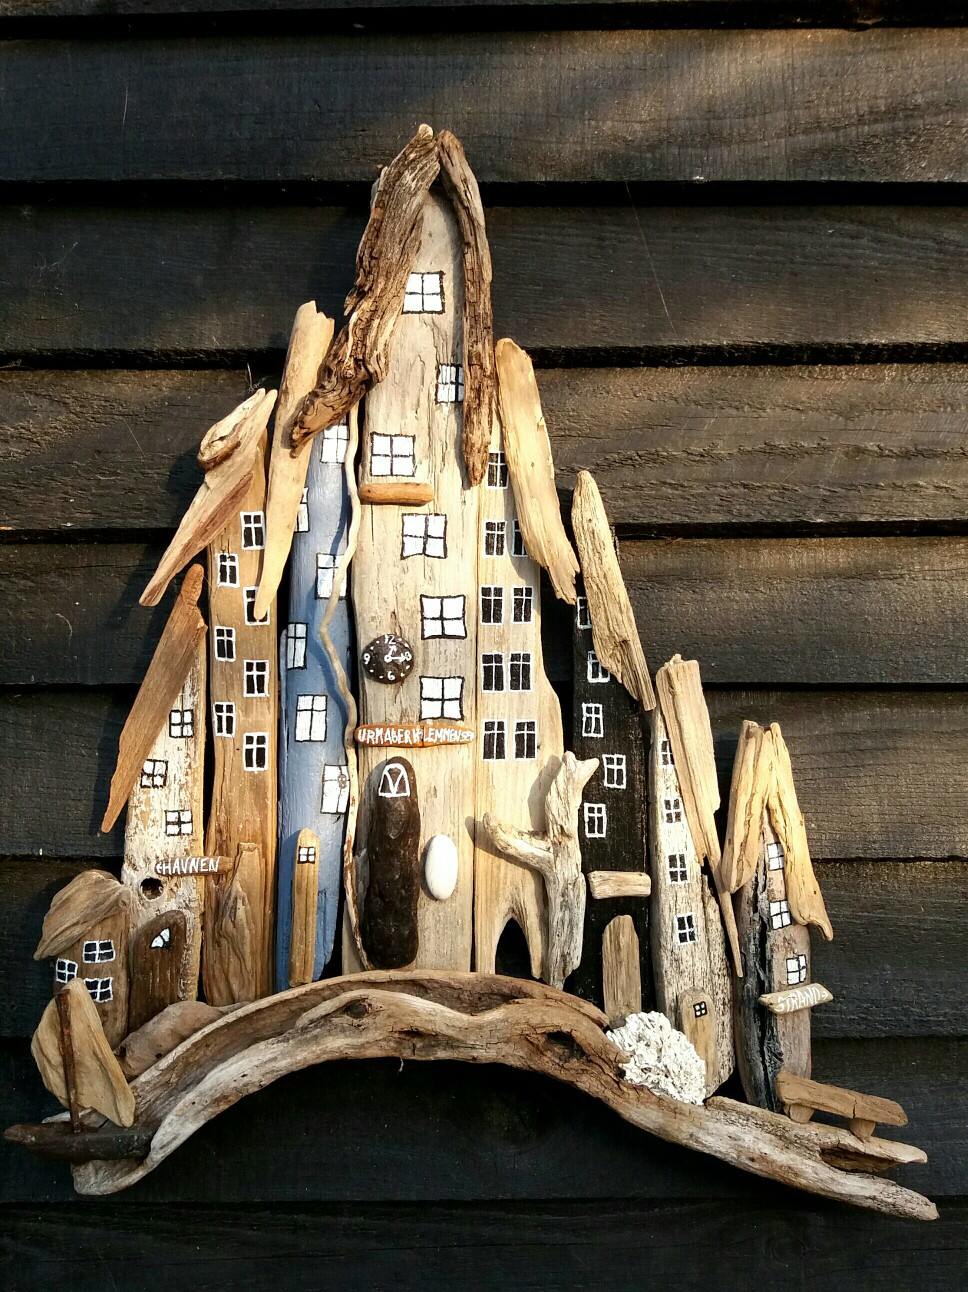 Driftwood Craft Ideas
 Fill Your Home With 45 Delicate DIY Driftwood Crafts